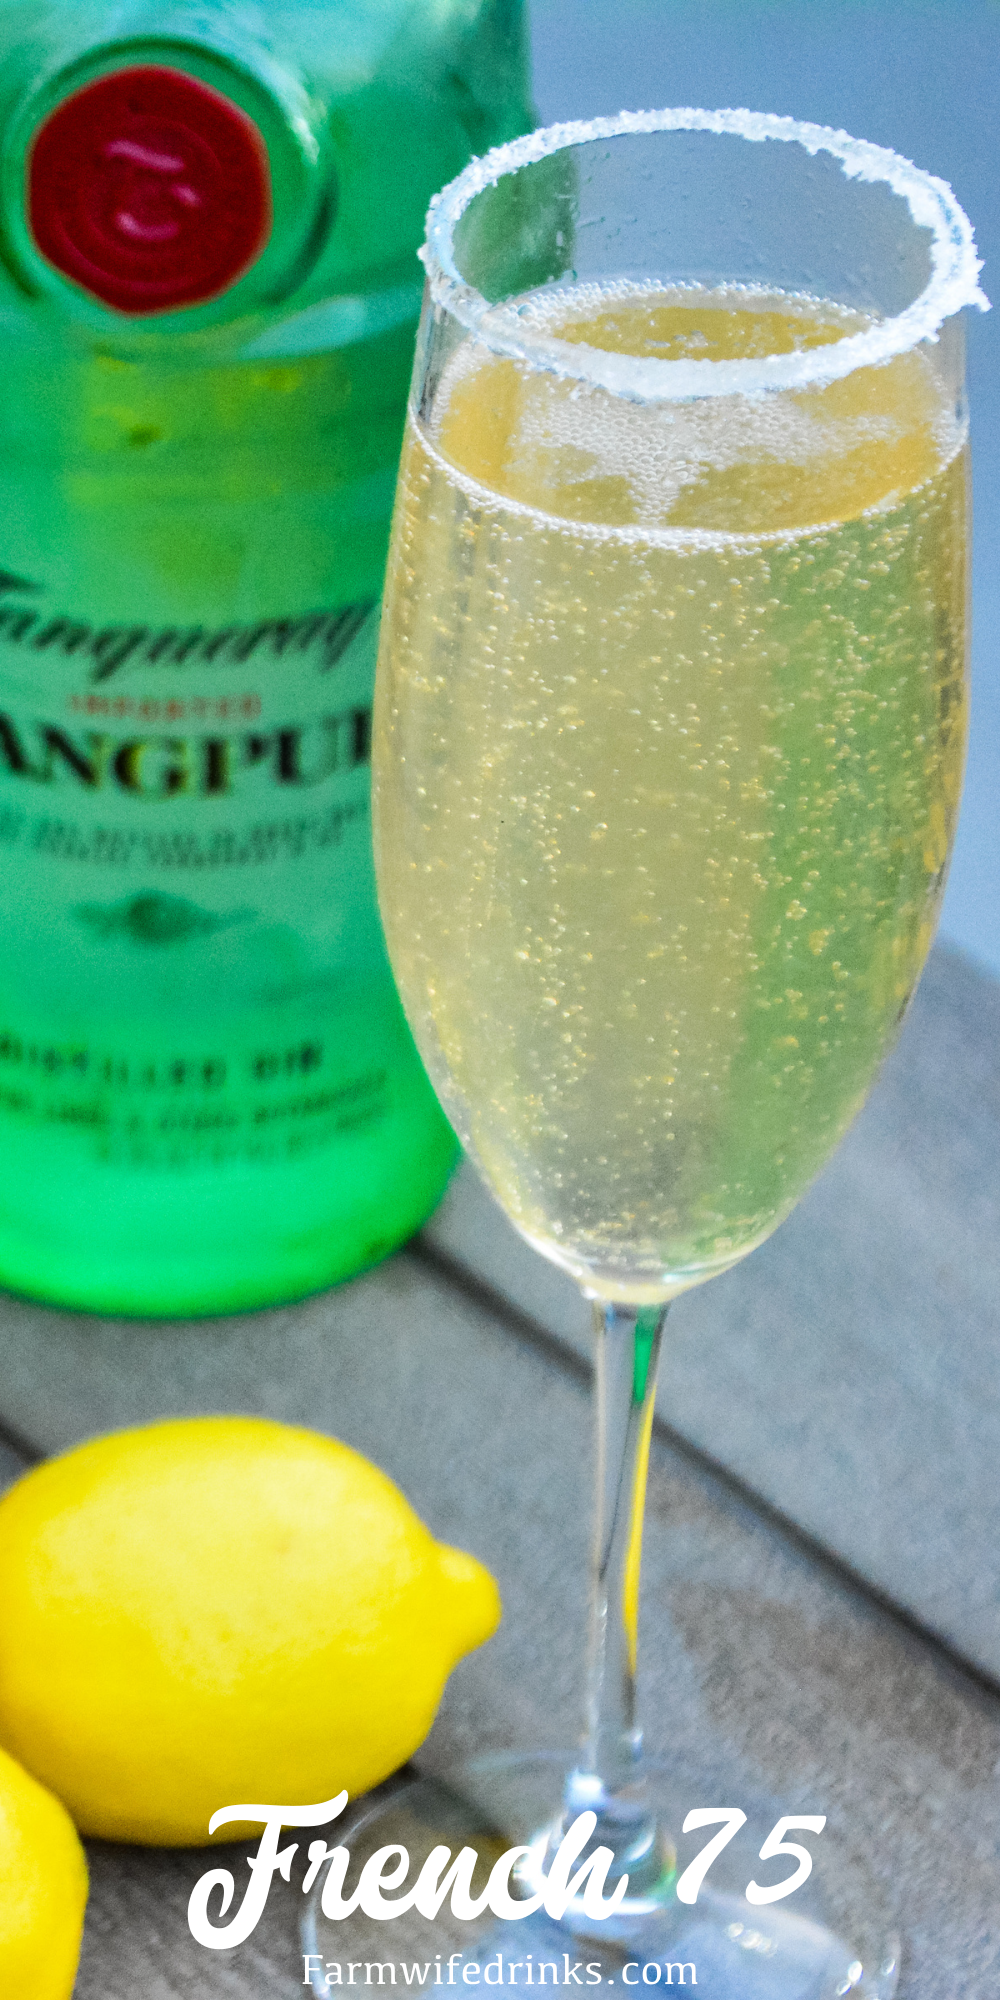 The French 75 is an easy champagne cocktail made with lemon juice, simple syrup, and gin topped off with prosecco or champagne.